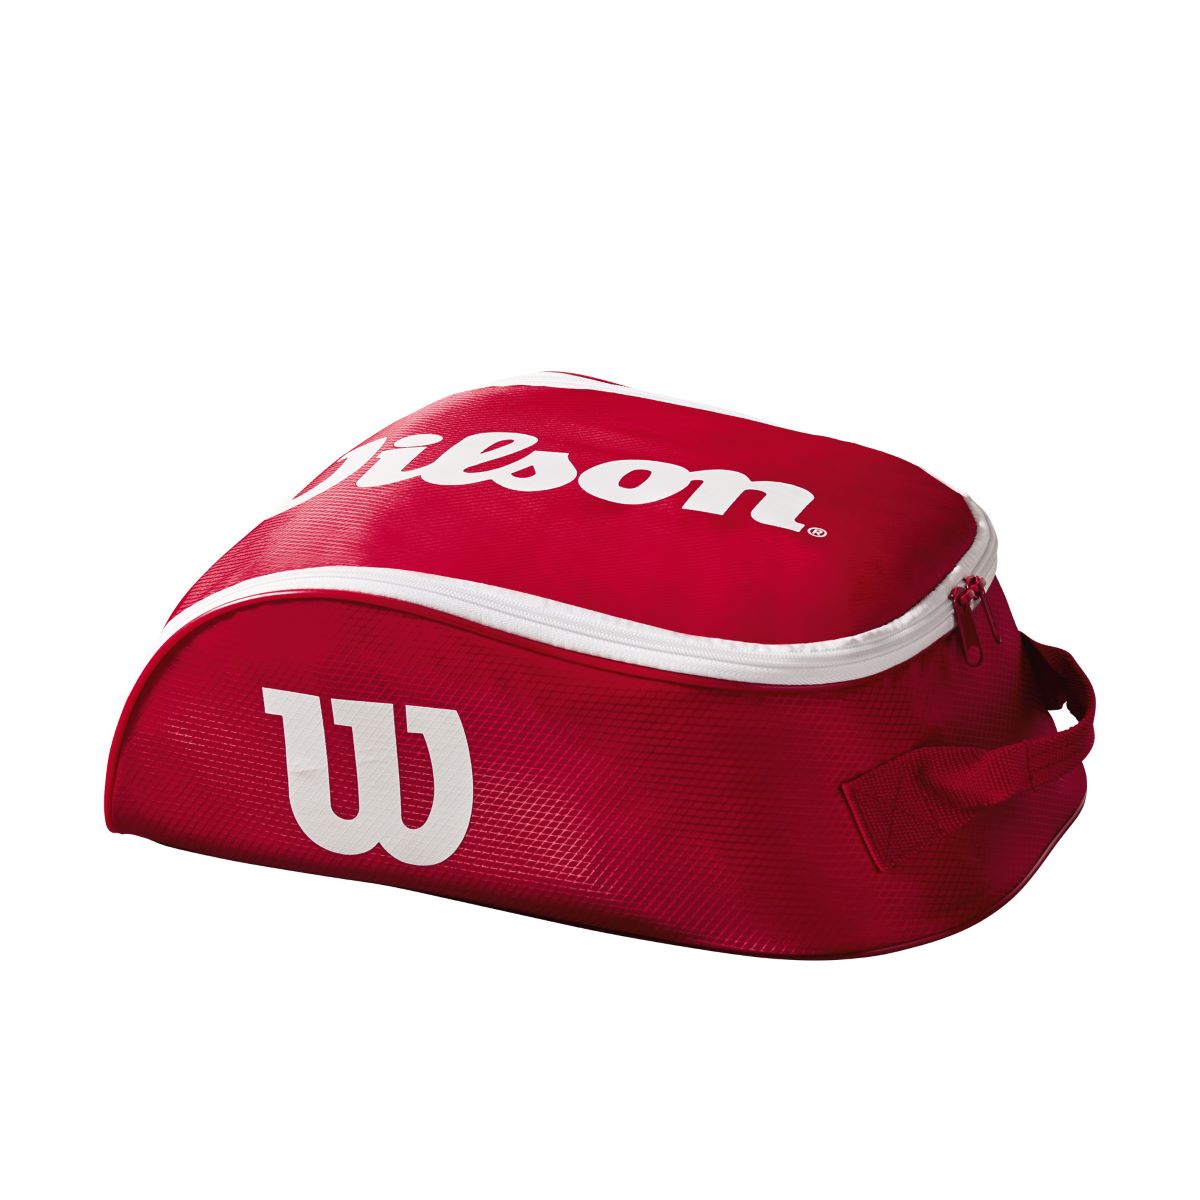 WRZ847887_0_Tour_IV_Shoe_Bag_RD_WH_Front.png.high-res